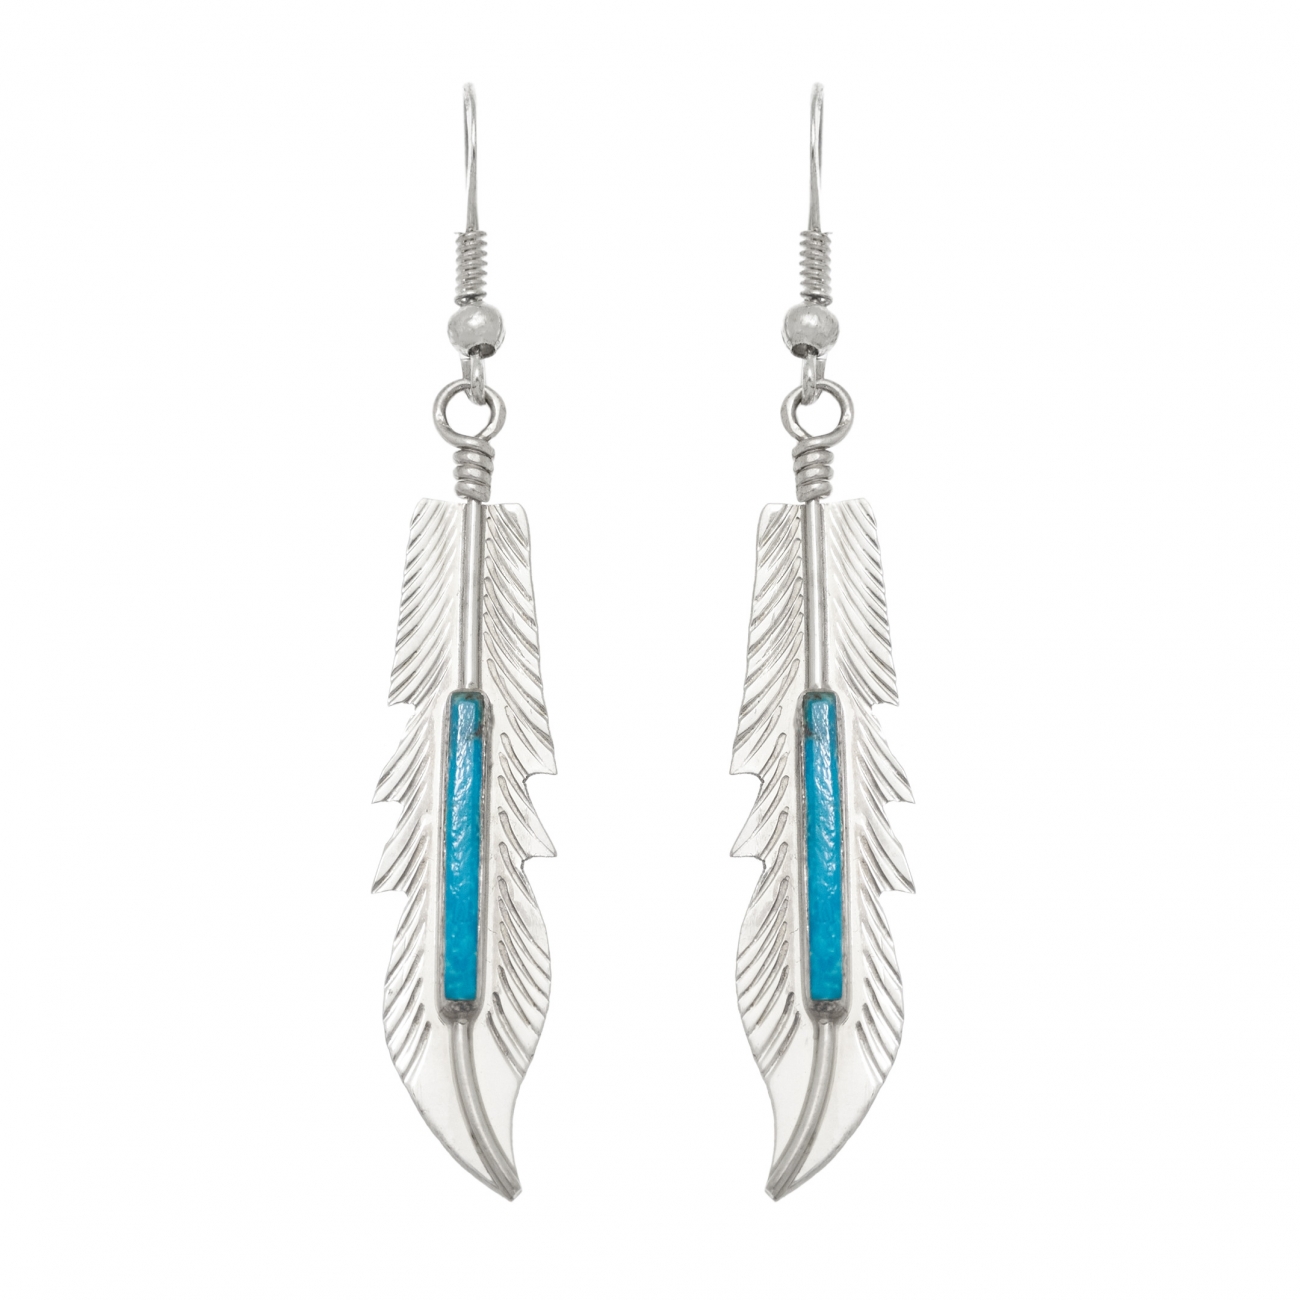 Earrings Harpo Paris BOw13 in turquoise and silver